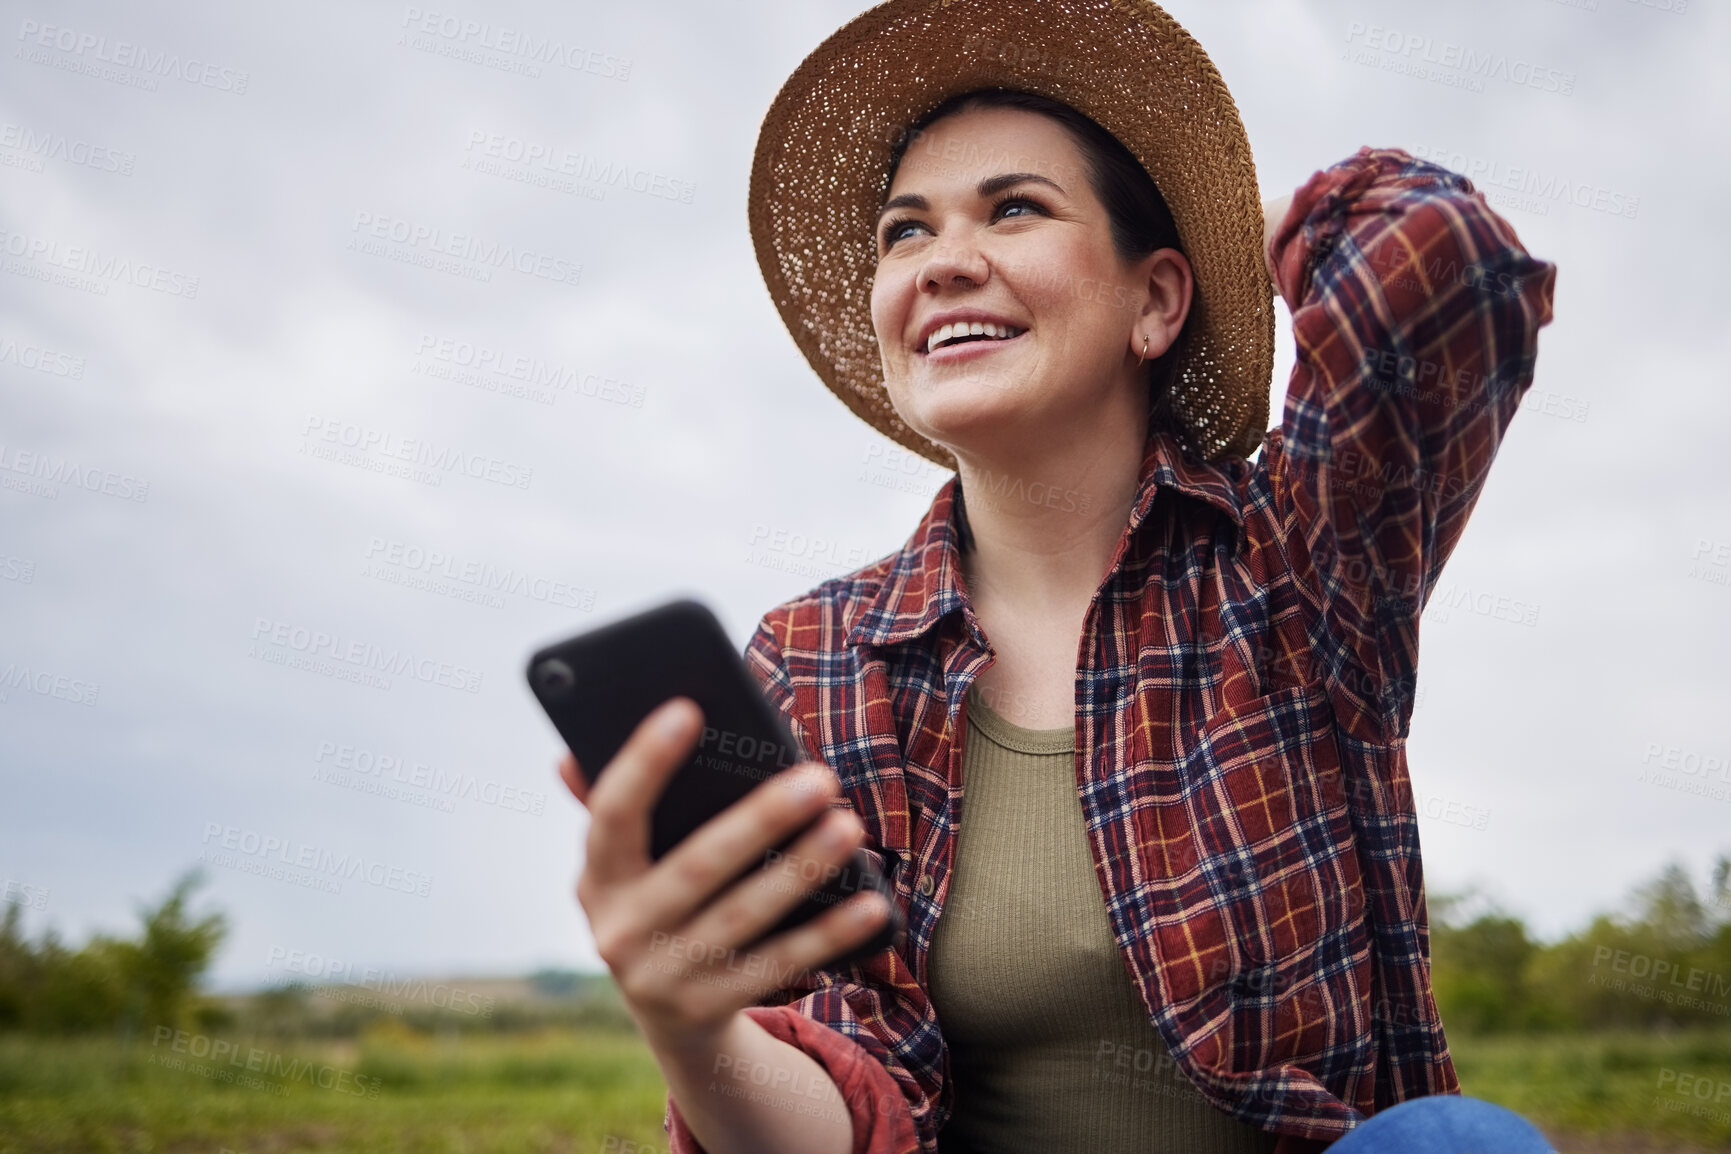 Buy stock photo Agriculture, nature and 5g connection by farmer texting on a phone, reading social media while relaxing outdoors. Happy worker browsing the internet for natural sustainability tips, products online